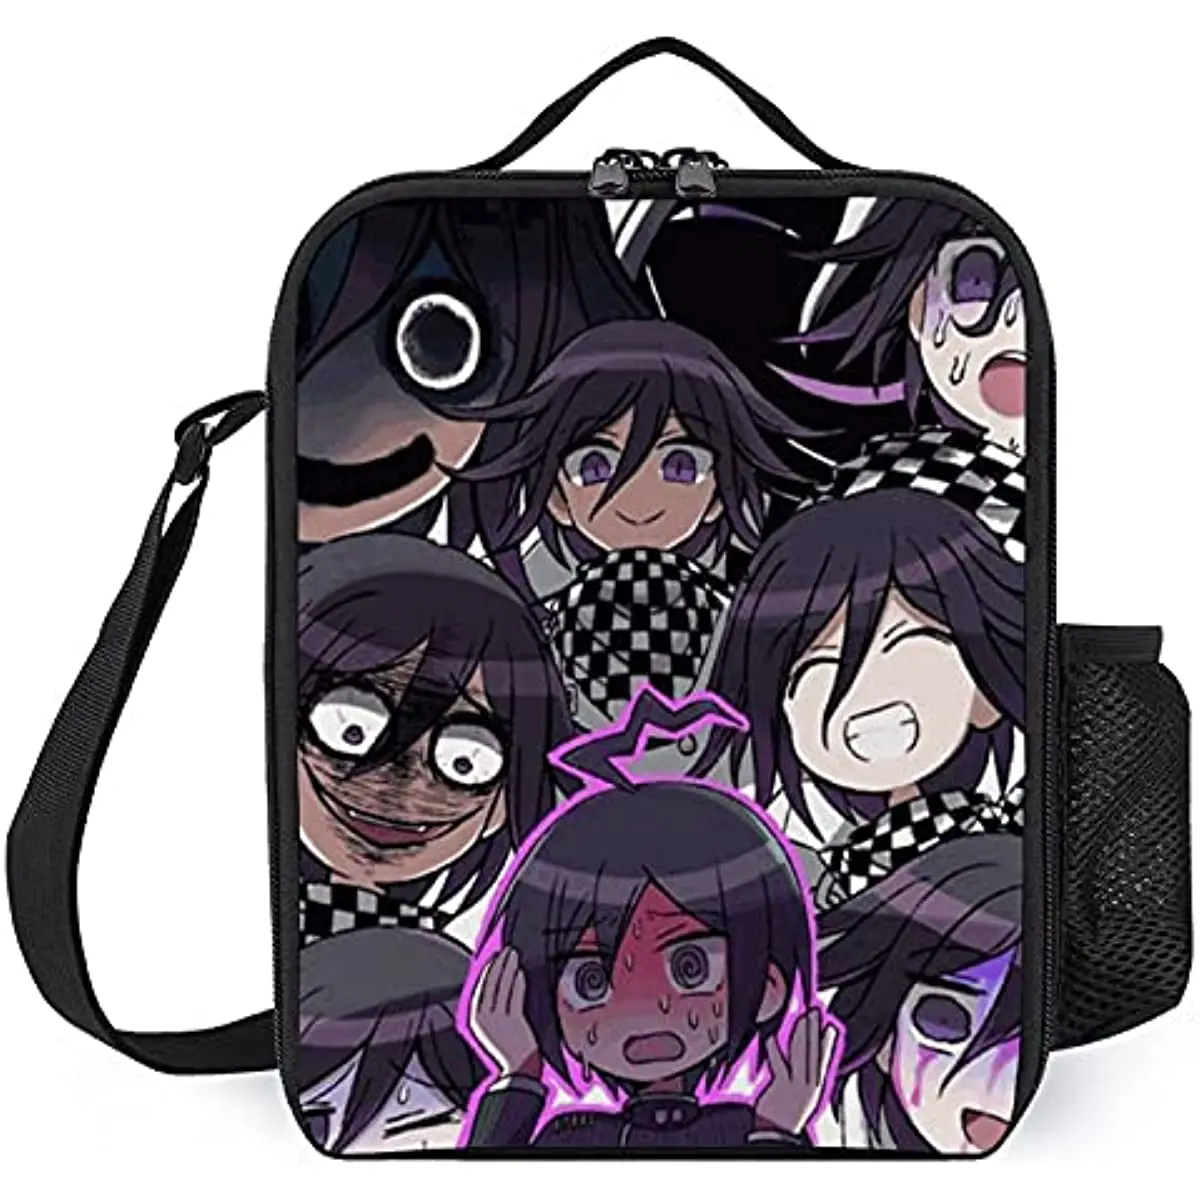 

Anime Lunch Bag with Adjustable Shoulder Strap Reusable Leakproof Lunch Box for Men Women Kids, for Outdoor Activities Work